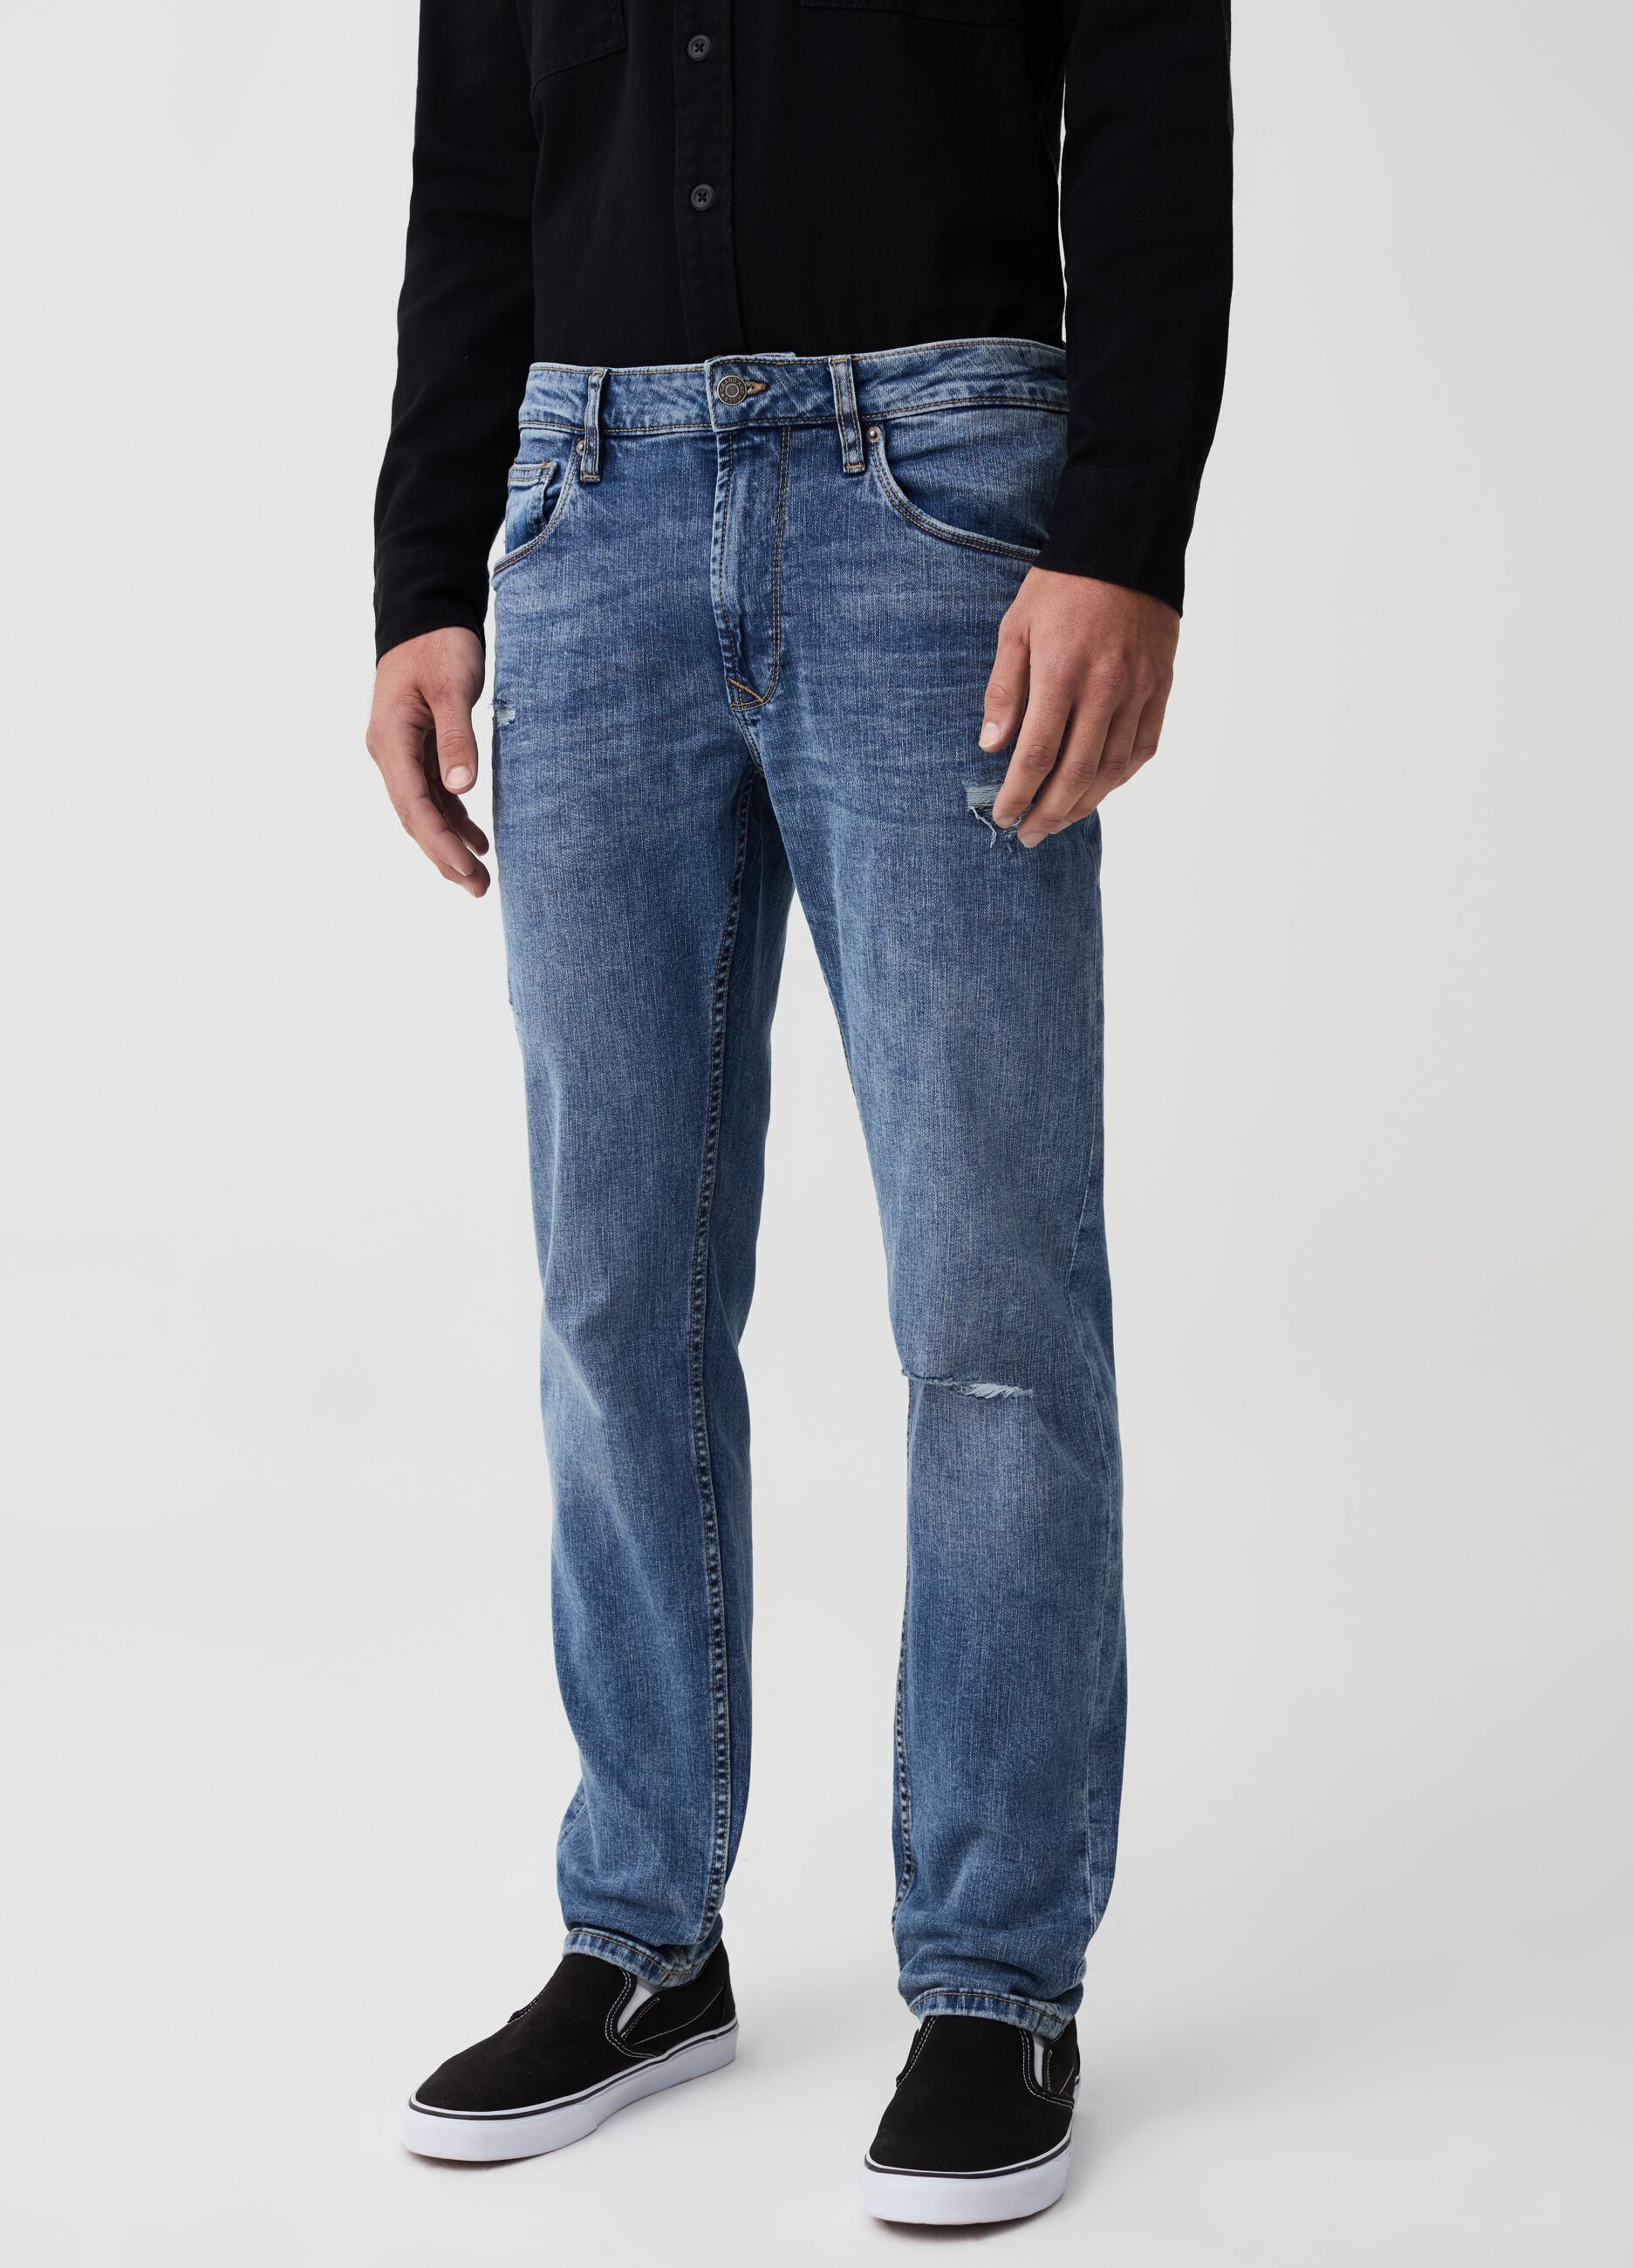 Slim-fit jeans with abrasions and fading